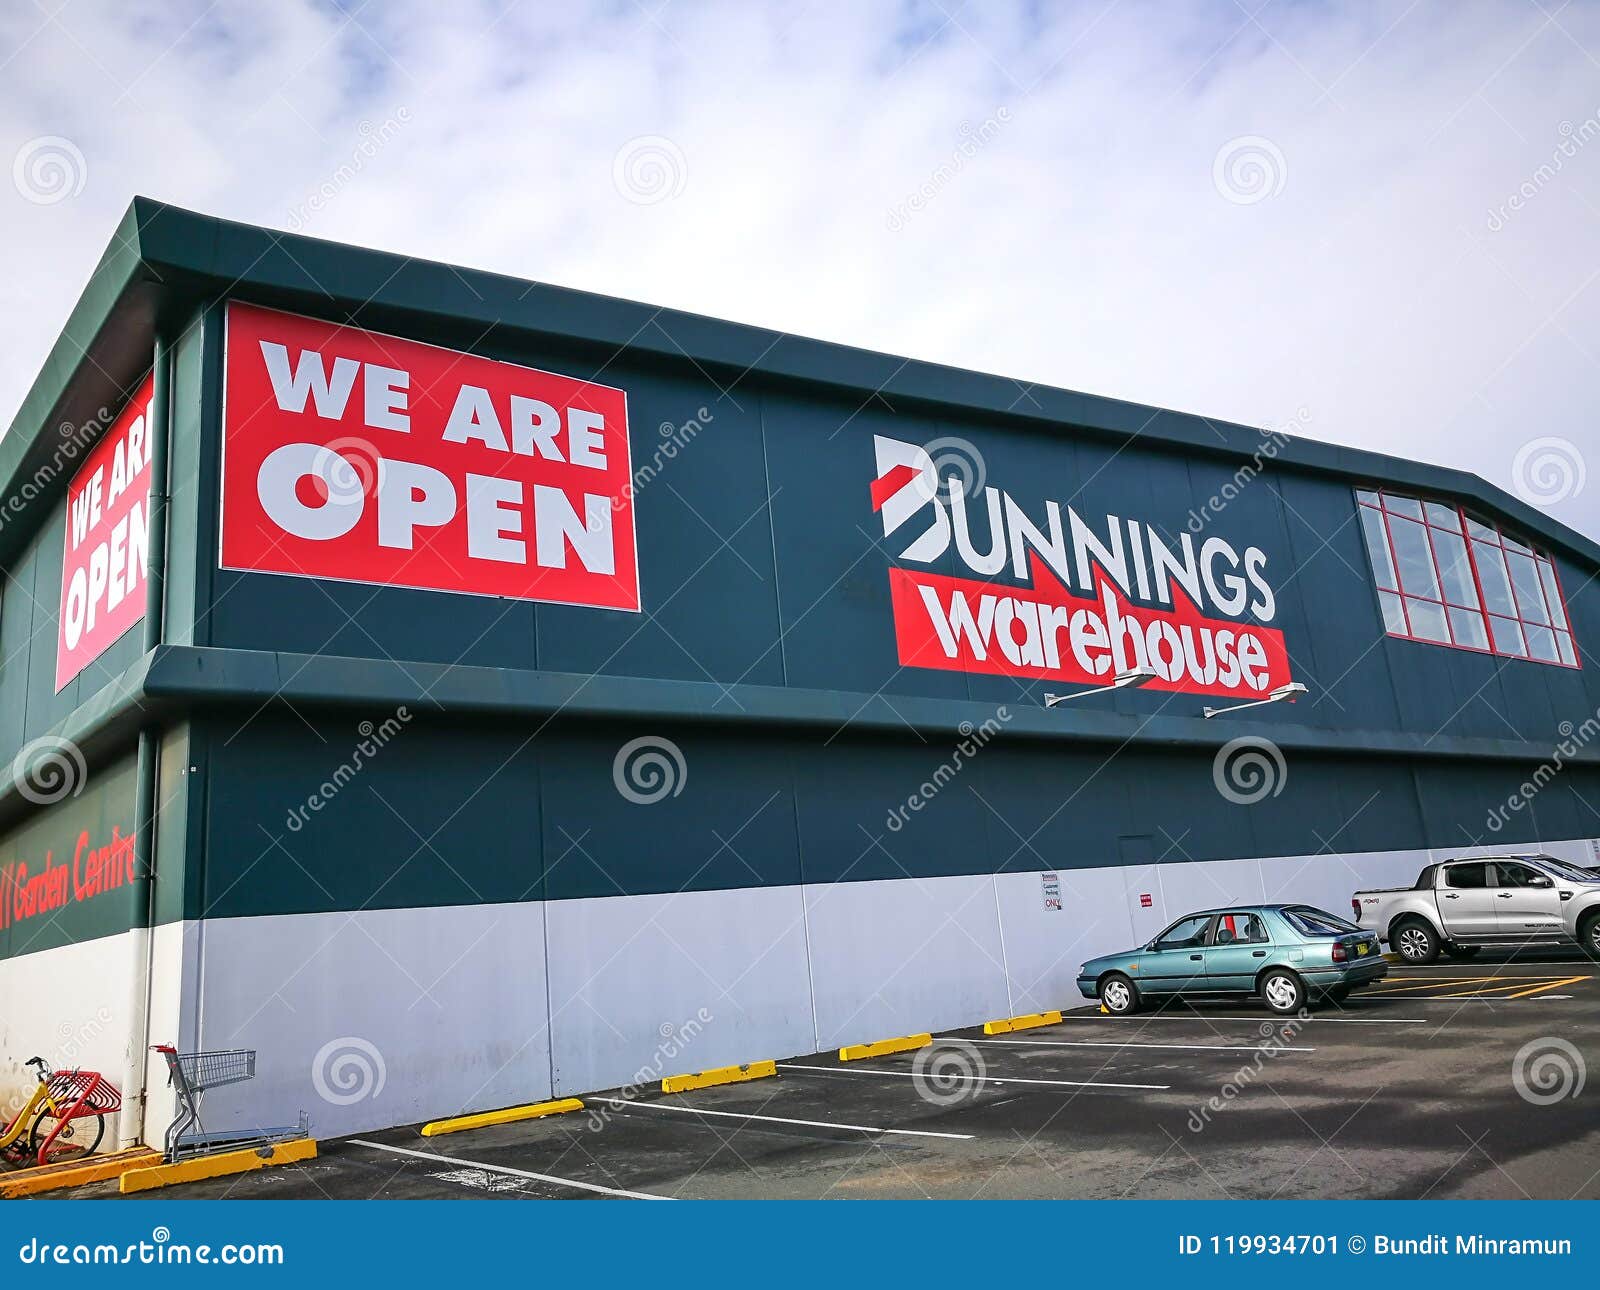 Bunnings Warehouse, is an Household Hardware Store, the Image Shows the Store Building at Mascot. Editorial Photo - Image of icon, banner: 119934701